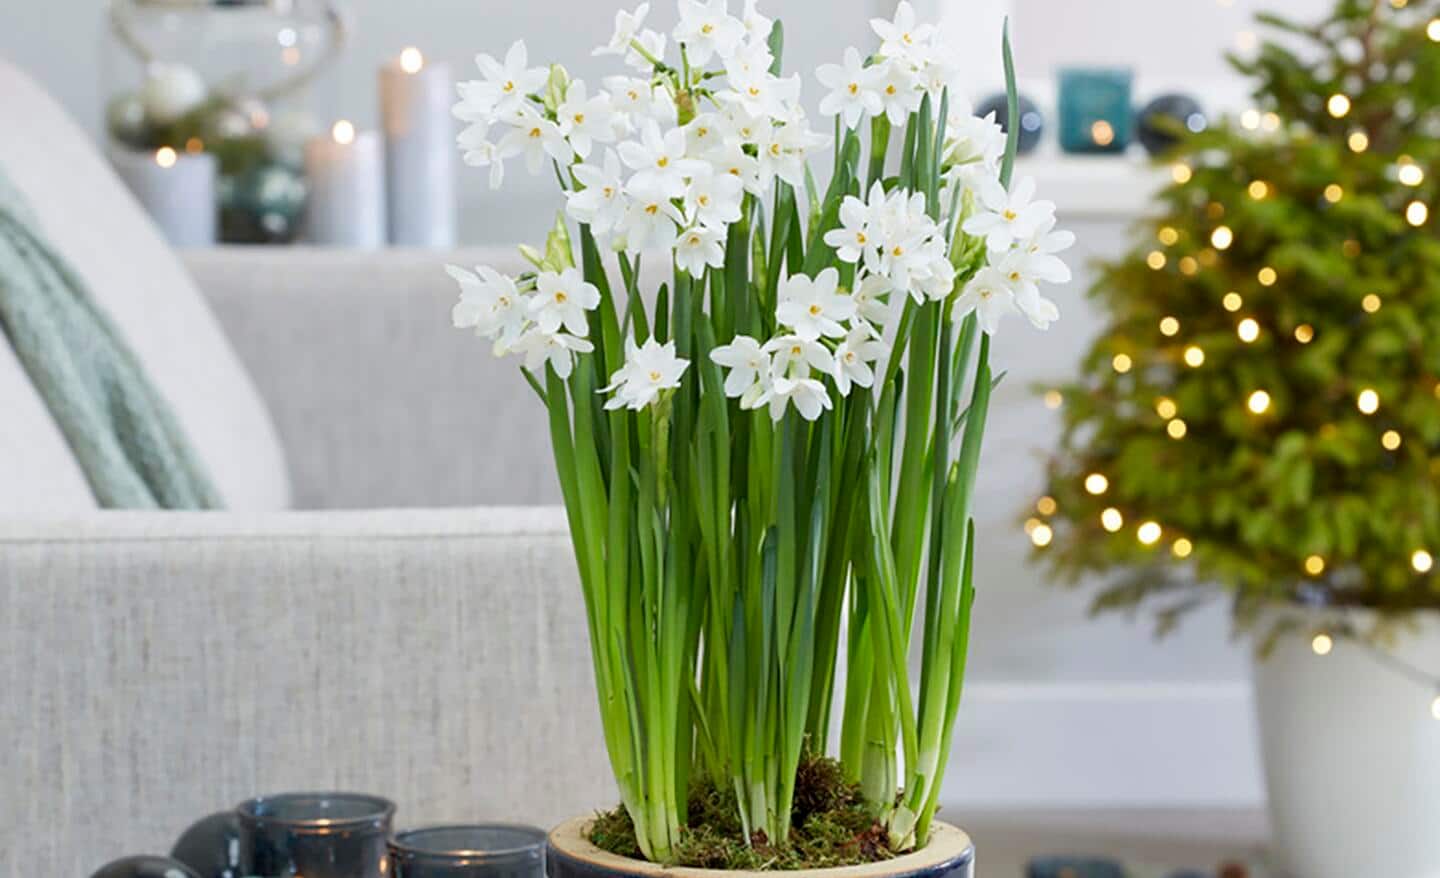 Paperwhite narcissus blooms in a container in a festive decorated living room